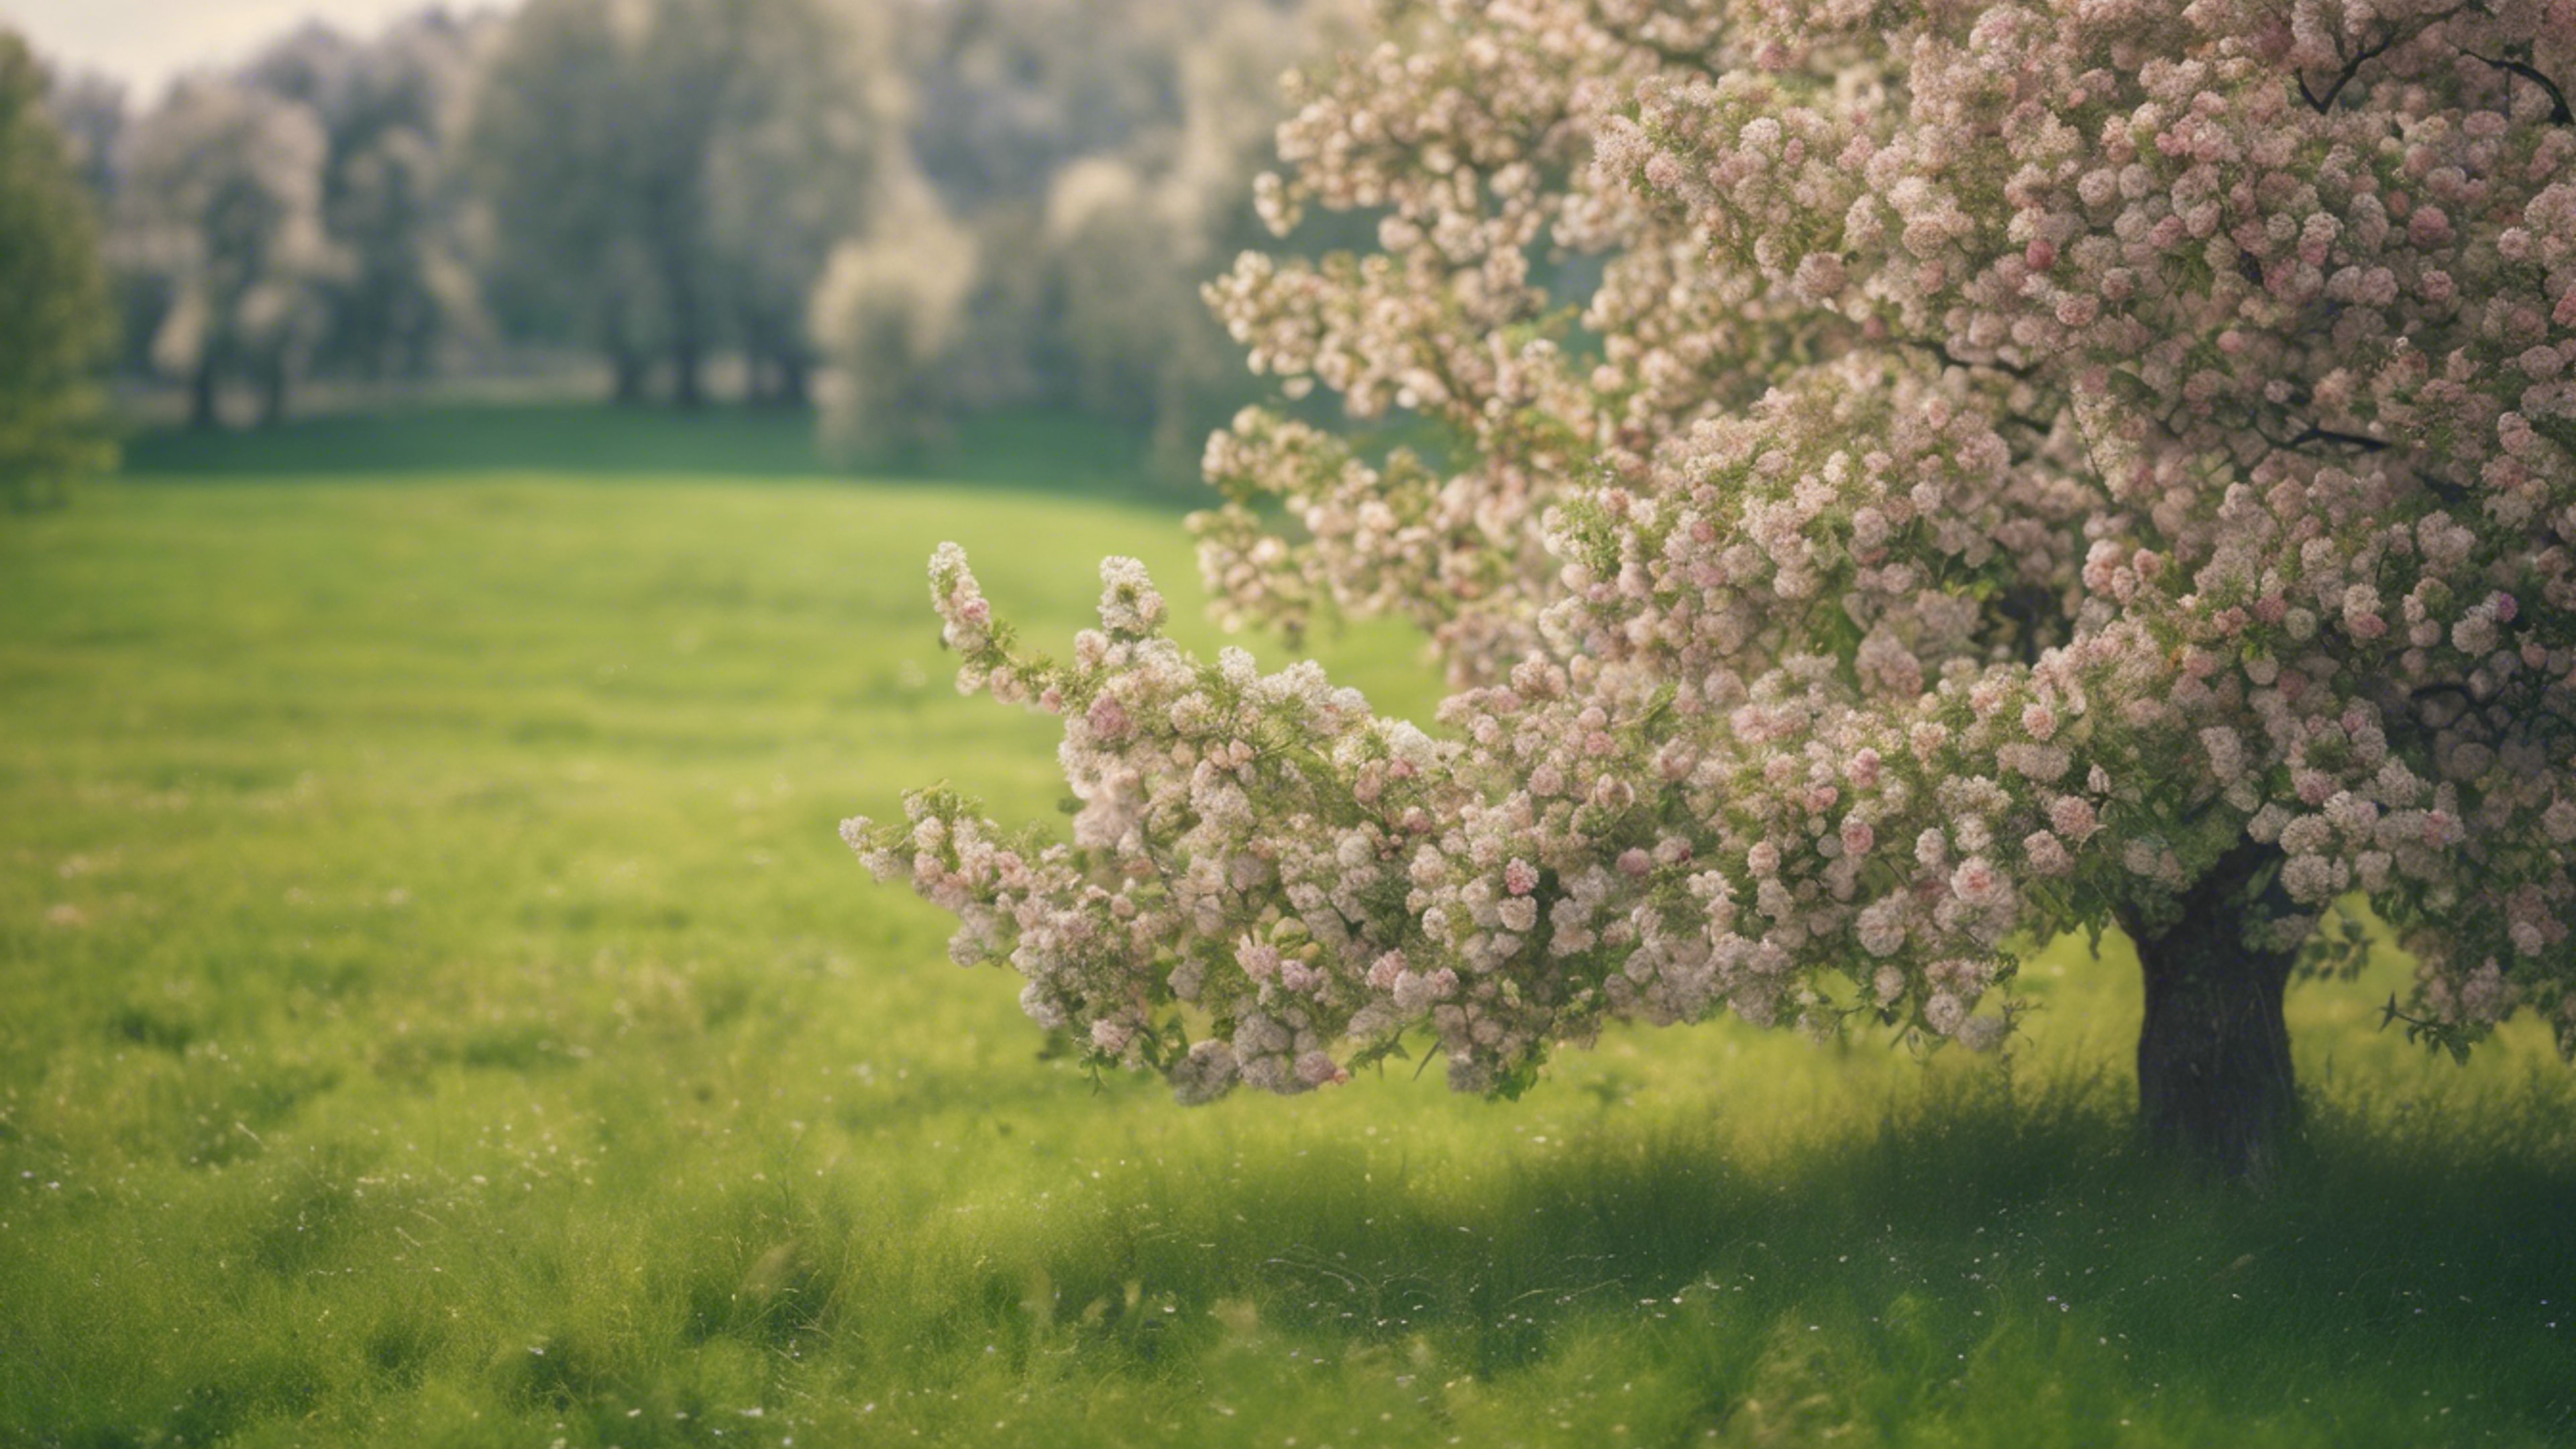 A flowering apple tree standing alone in a green, soft-focused meadow.壁紙[1ff1aa7d7c75473a9031]